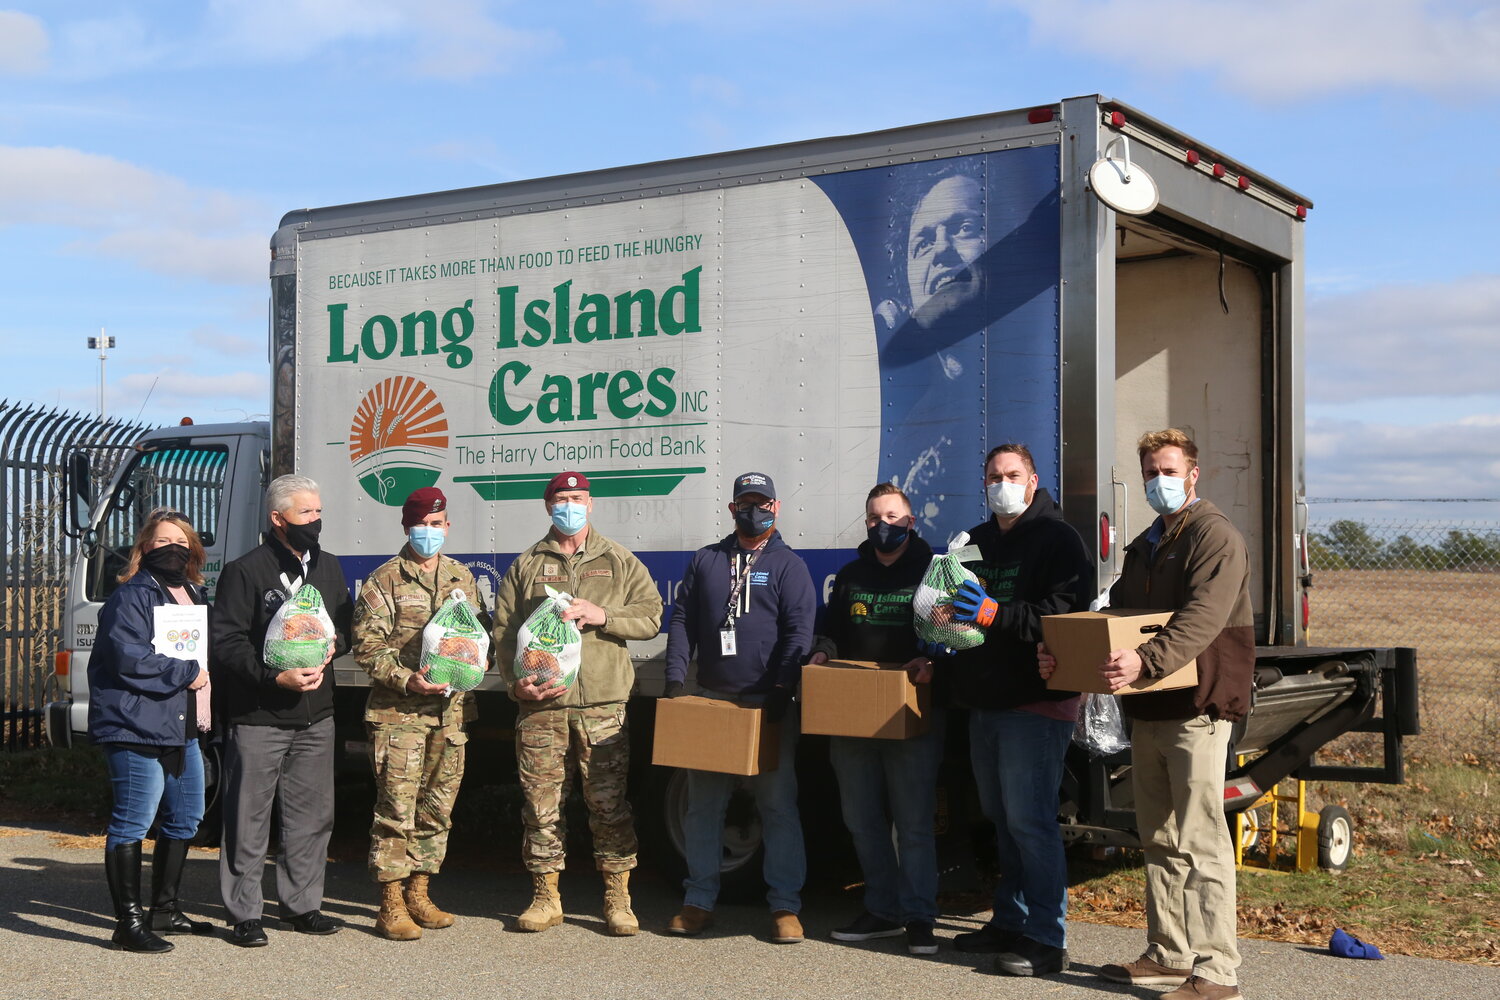 Long Island Cares, founded by the late Harry Chapin, focused on timely and safe food distribution during the pandemic, providing emergency food and educational resources.